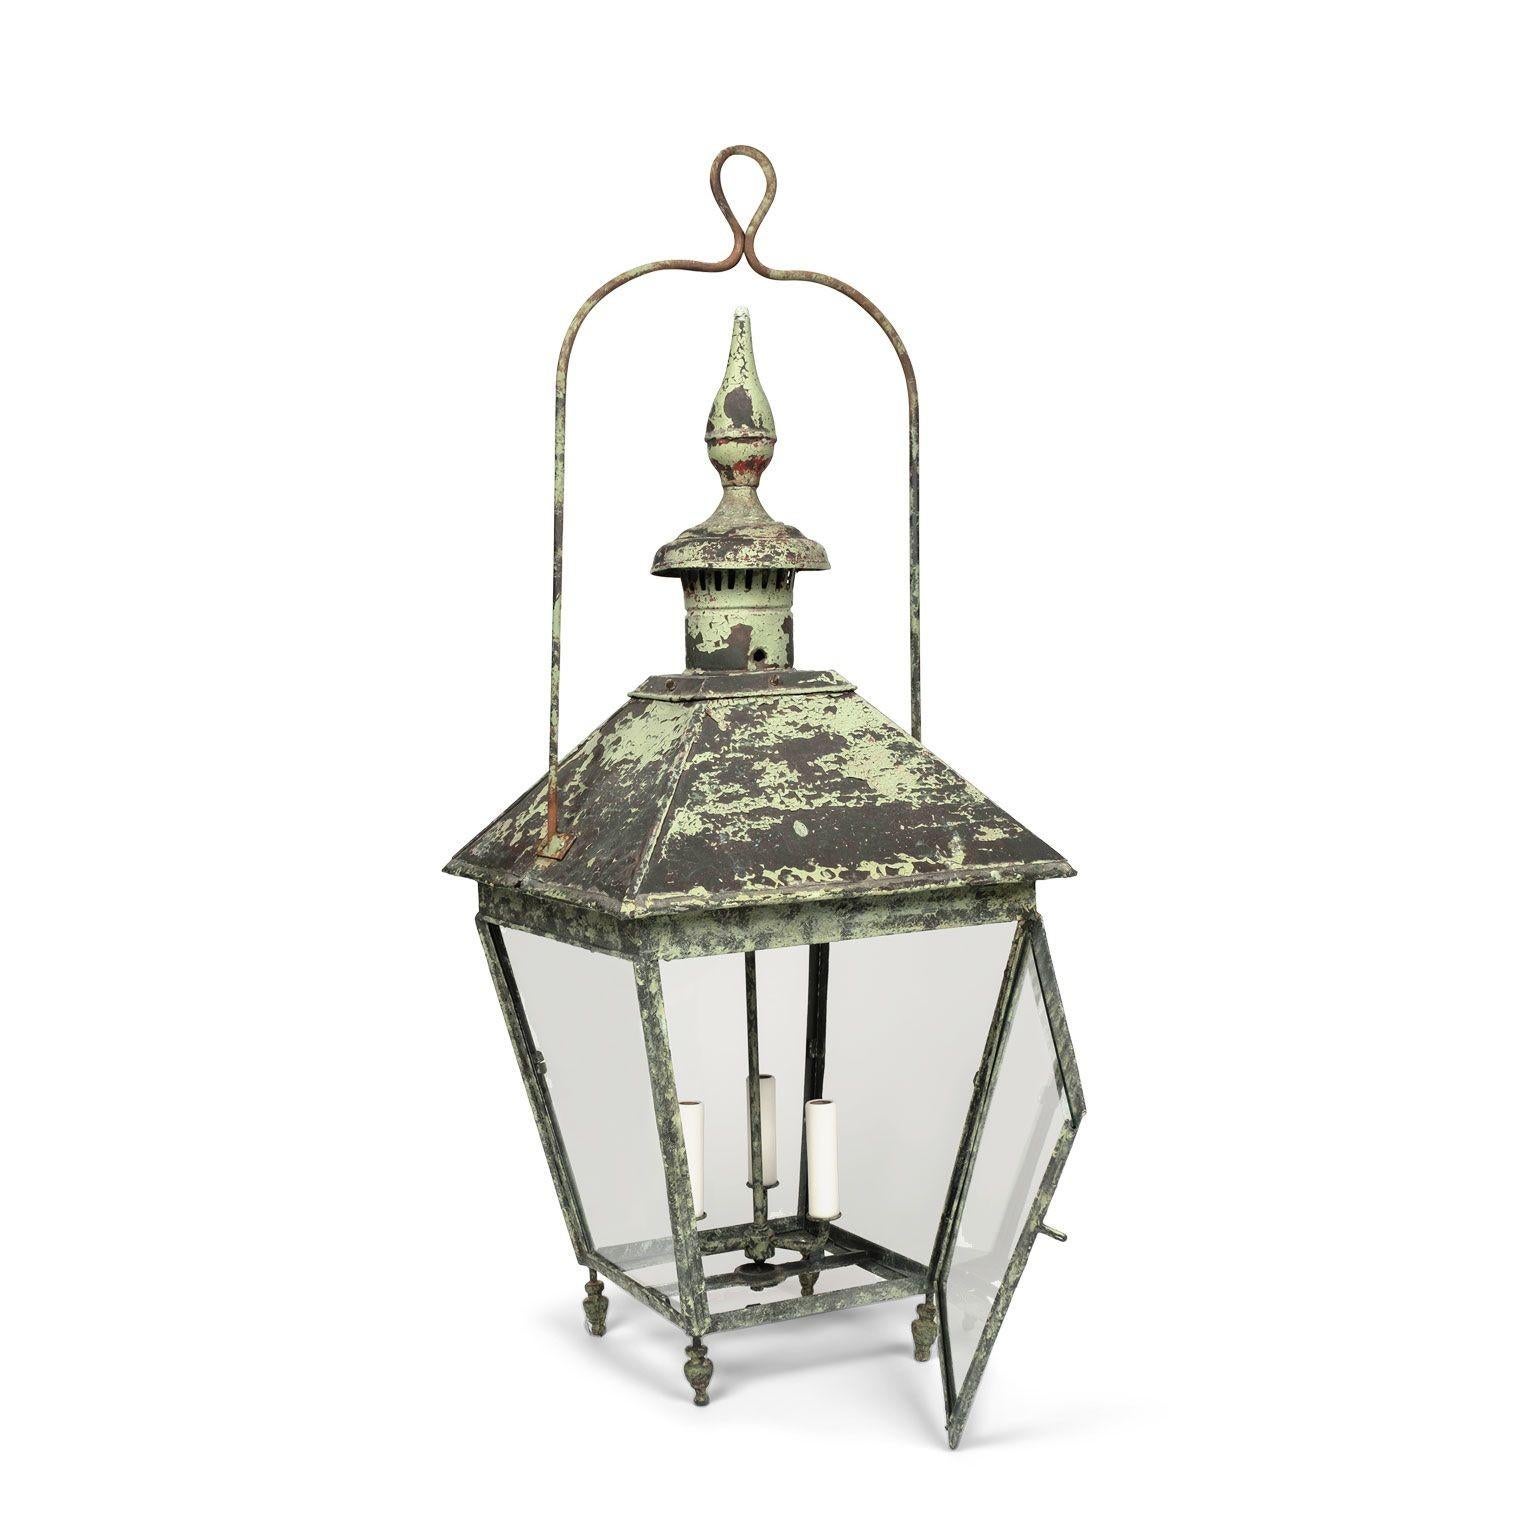 19th Century French Green-Painted Copper and Glass Paneled Lantern For Sale 6